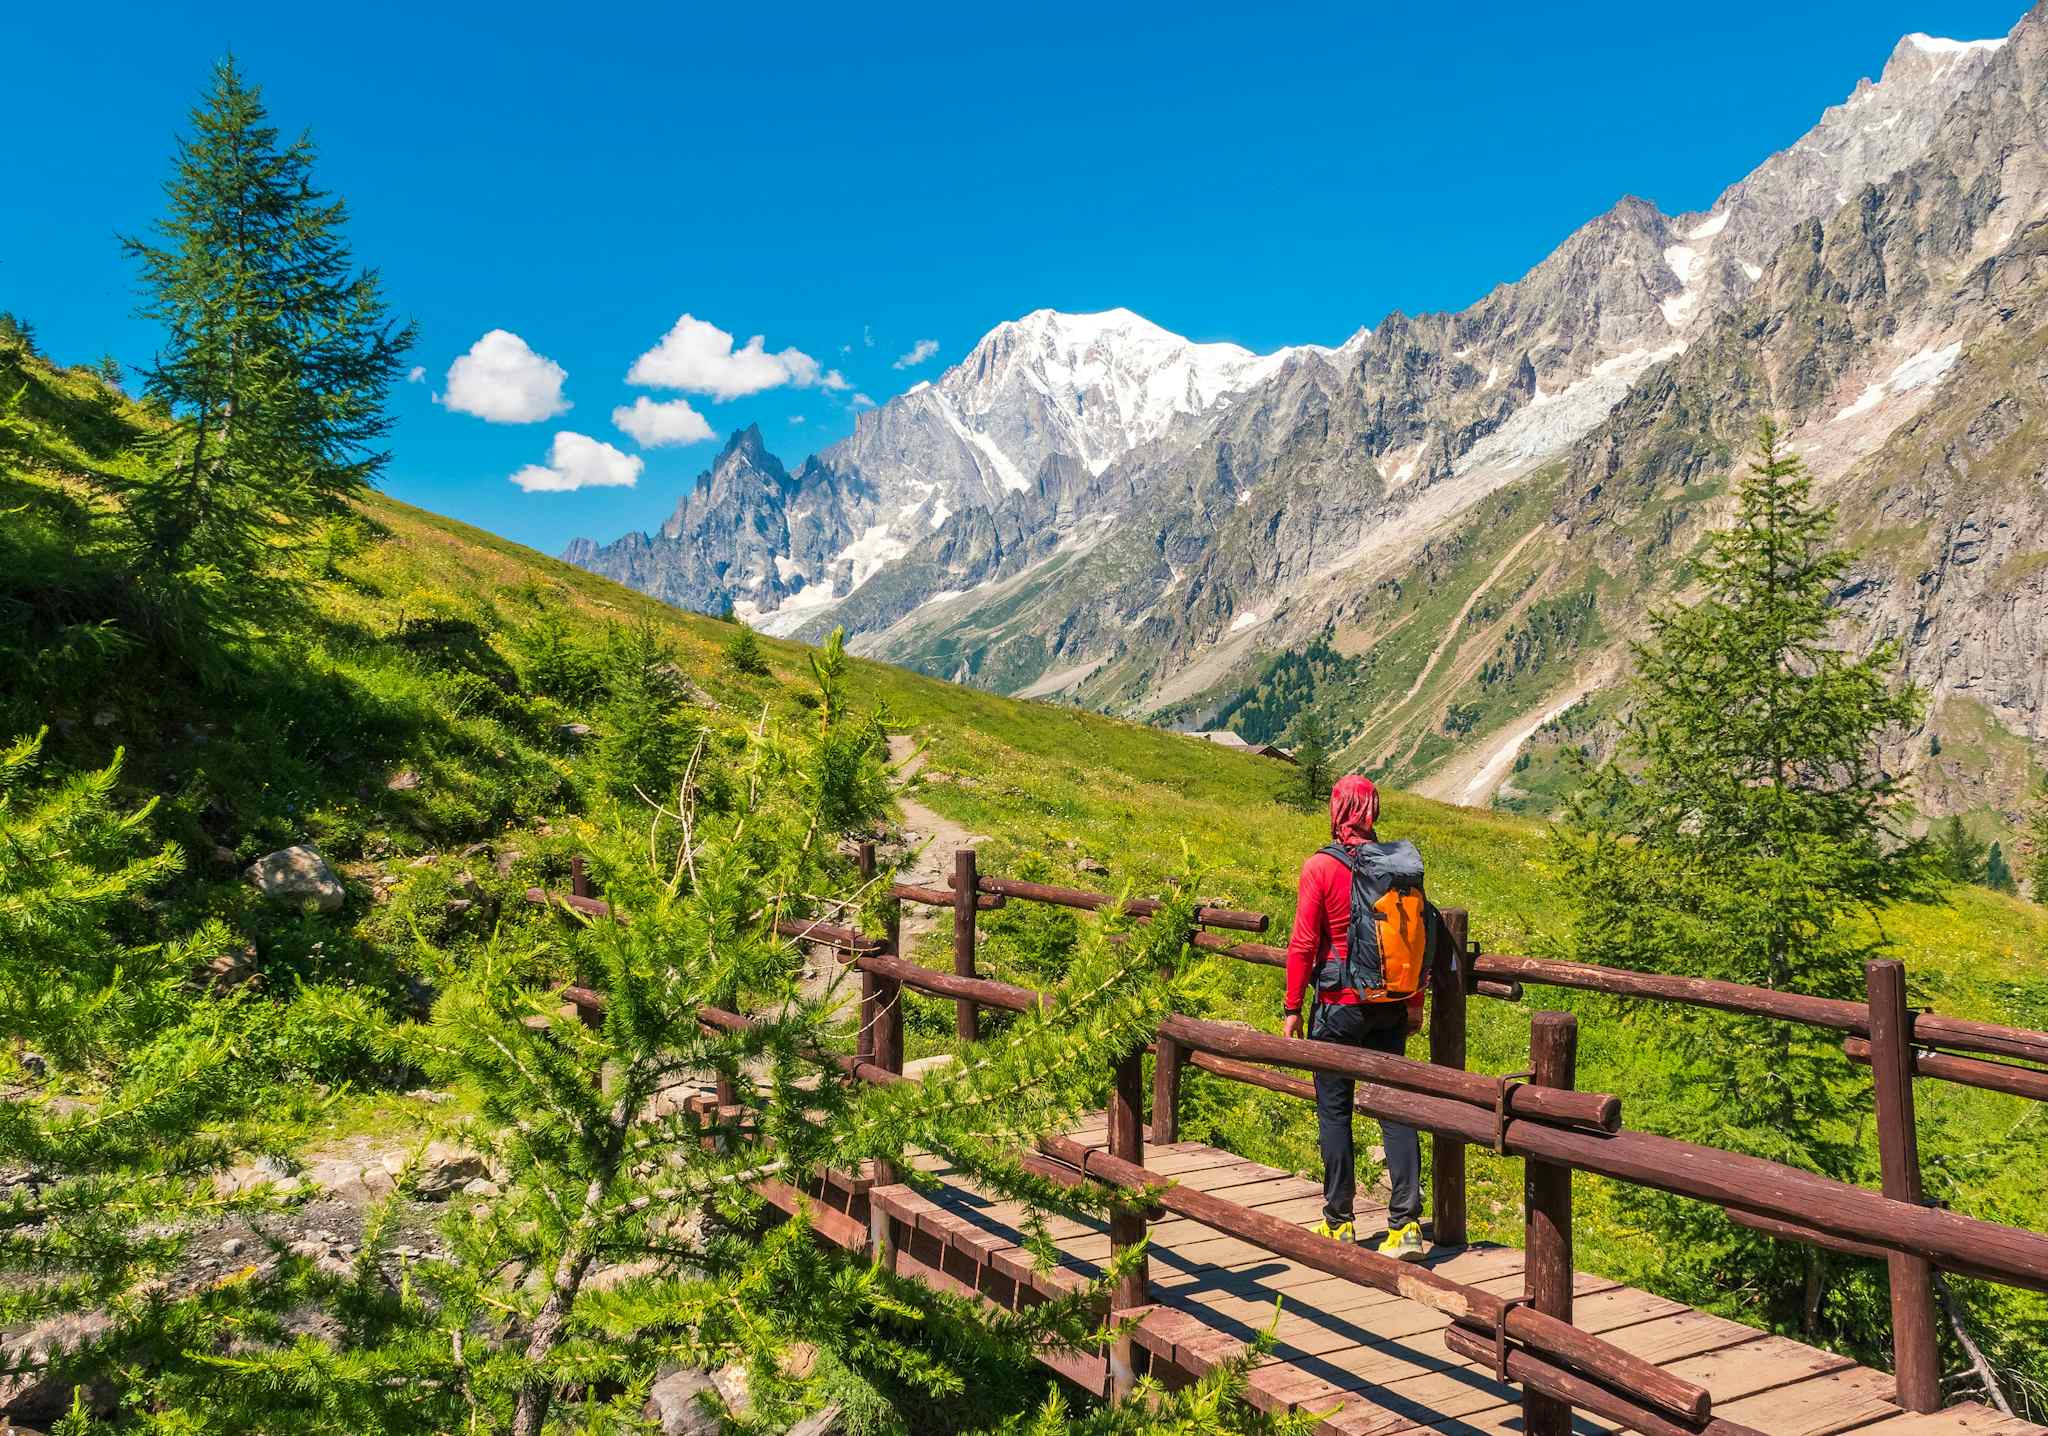 Val Ferret on the Tour du Mont Blanc between Switzerland & Italy. Photo: Host/Altai France